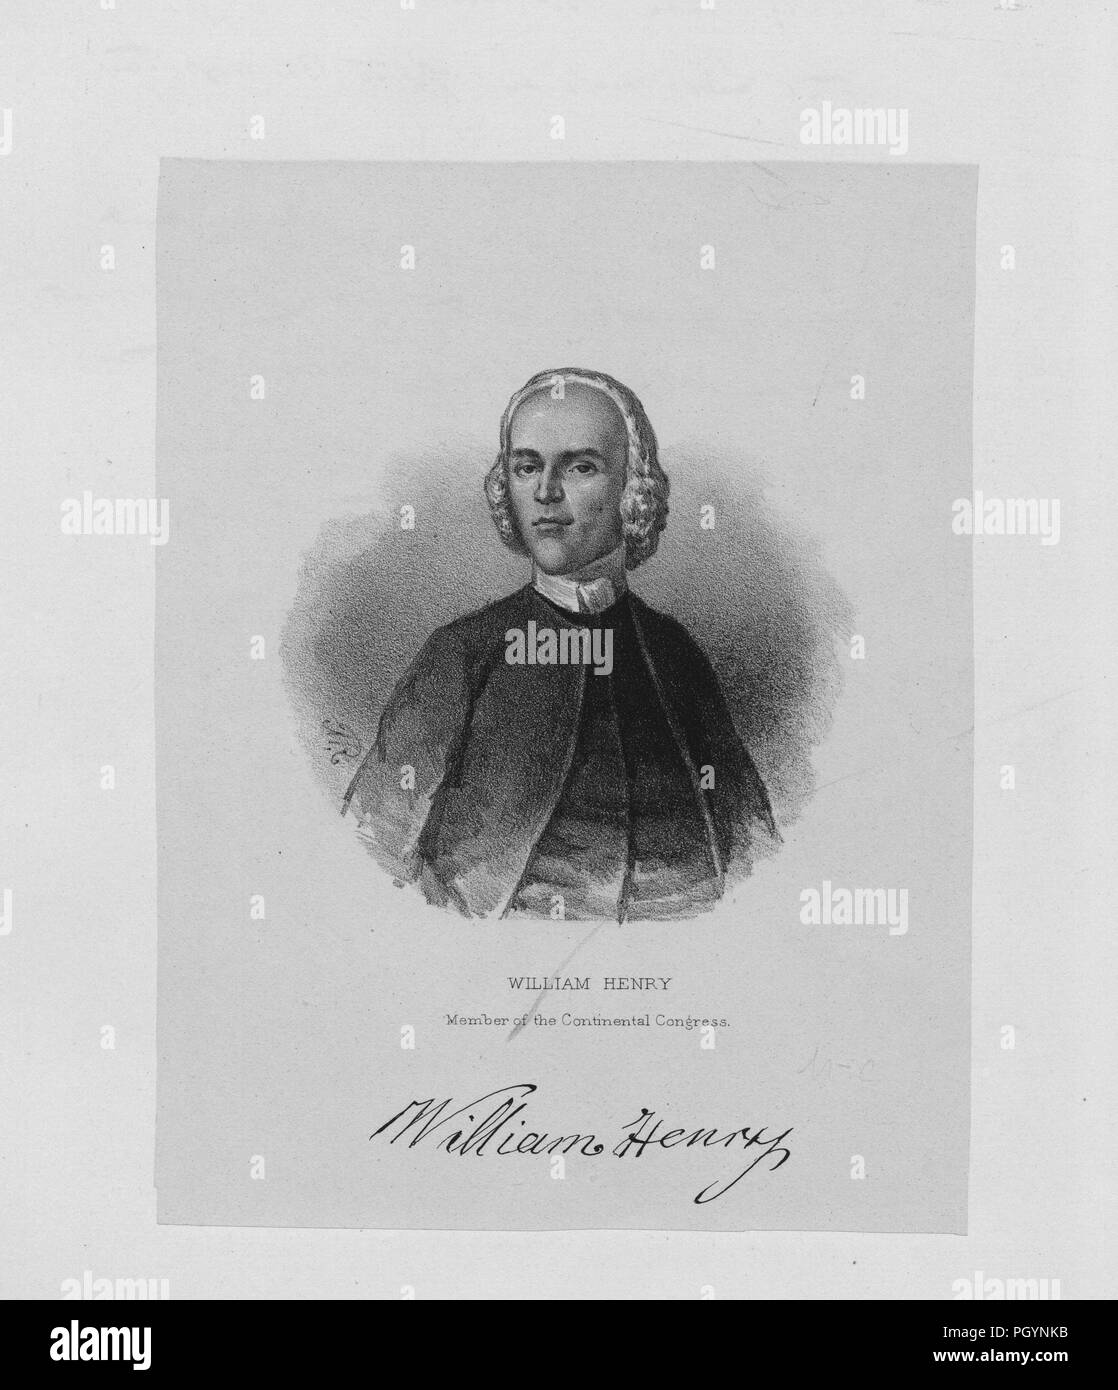 Black and white vintage print of William Henry, a gunsmith, engineer, merchant, and Pennsylvania delegate to the Continental Congress, depicted from the waist up, facing the viewer, with a serious expression on his face, wearing a wig, a dark jacket and vest, and an ascot tie, 1841. From the New York Public Library. () Stock Photo